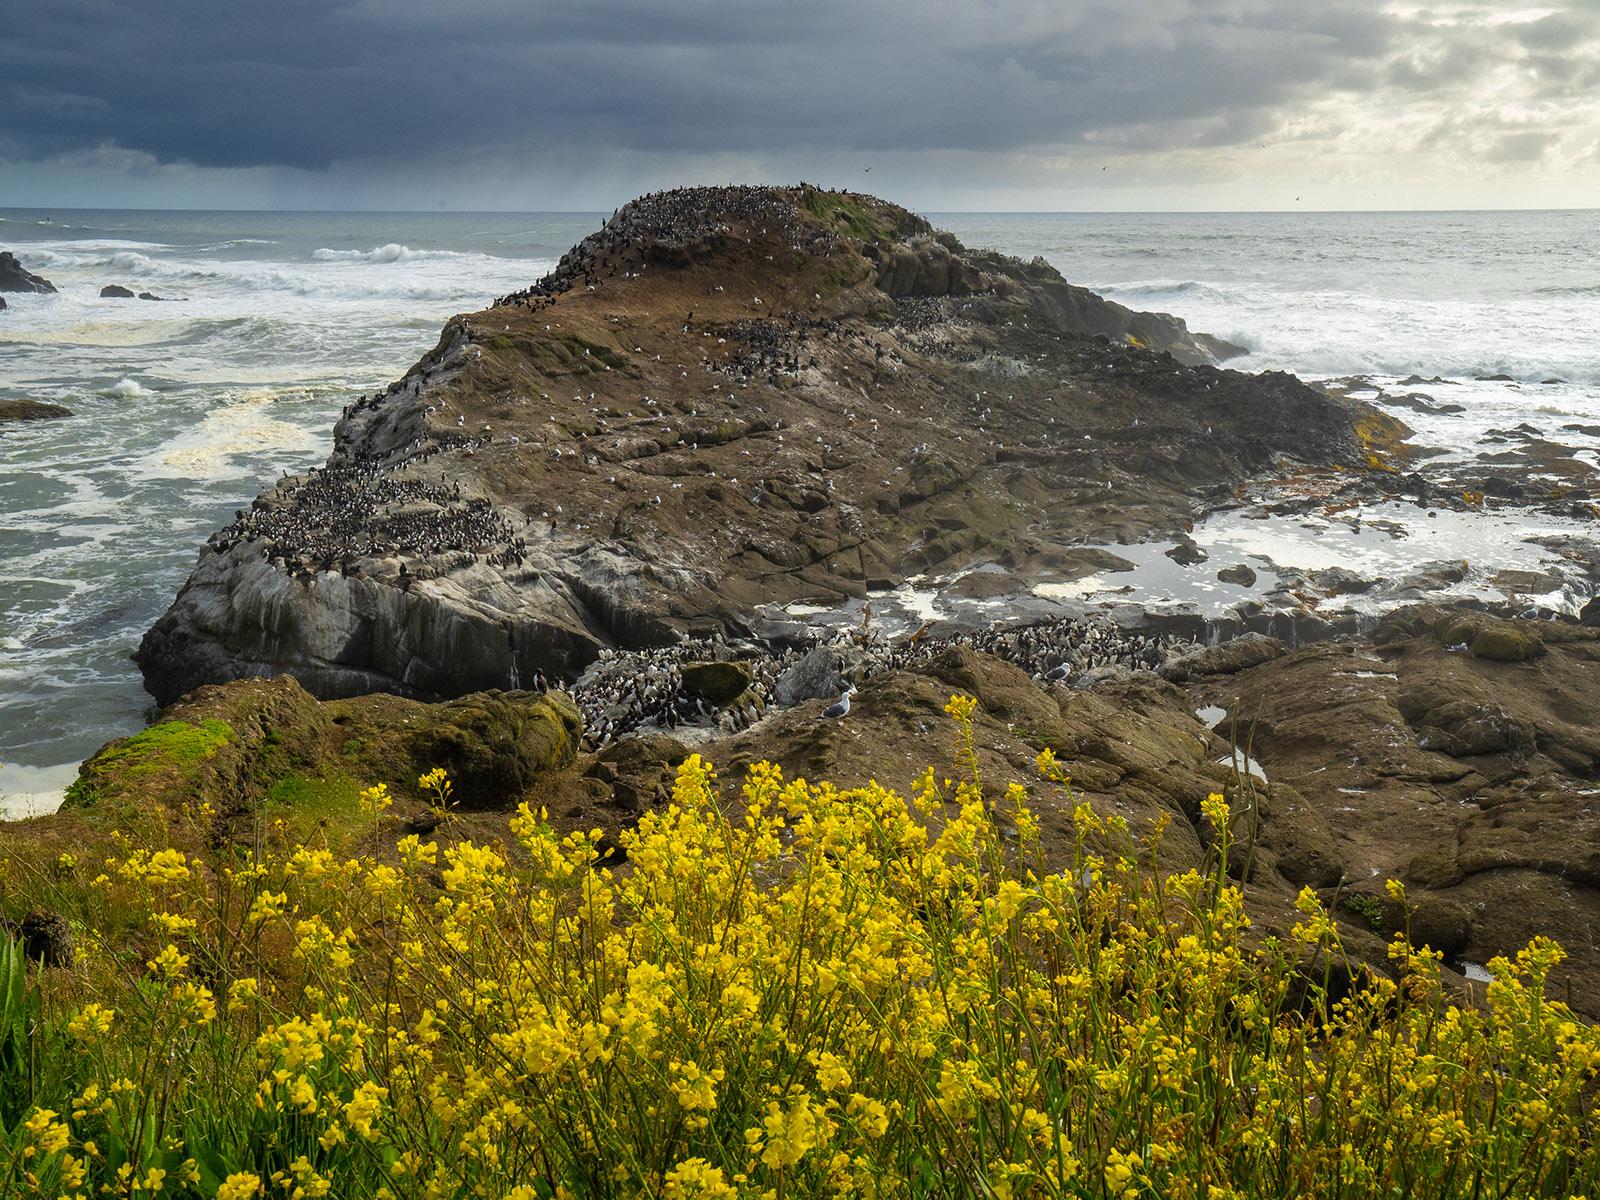 Yellow flowers and rocks off stormy Oregon Coast